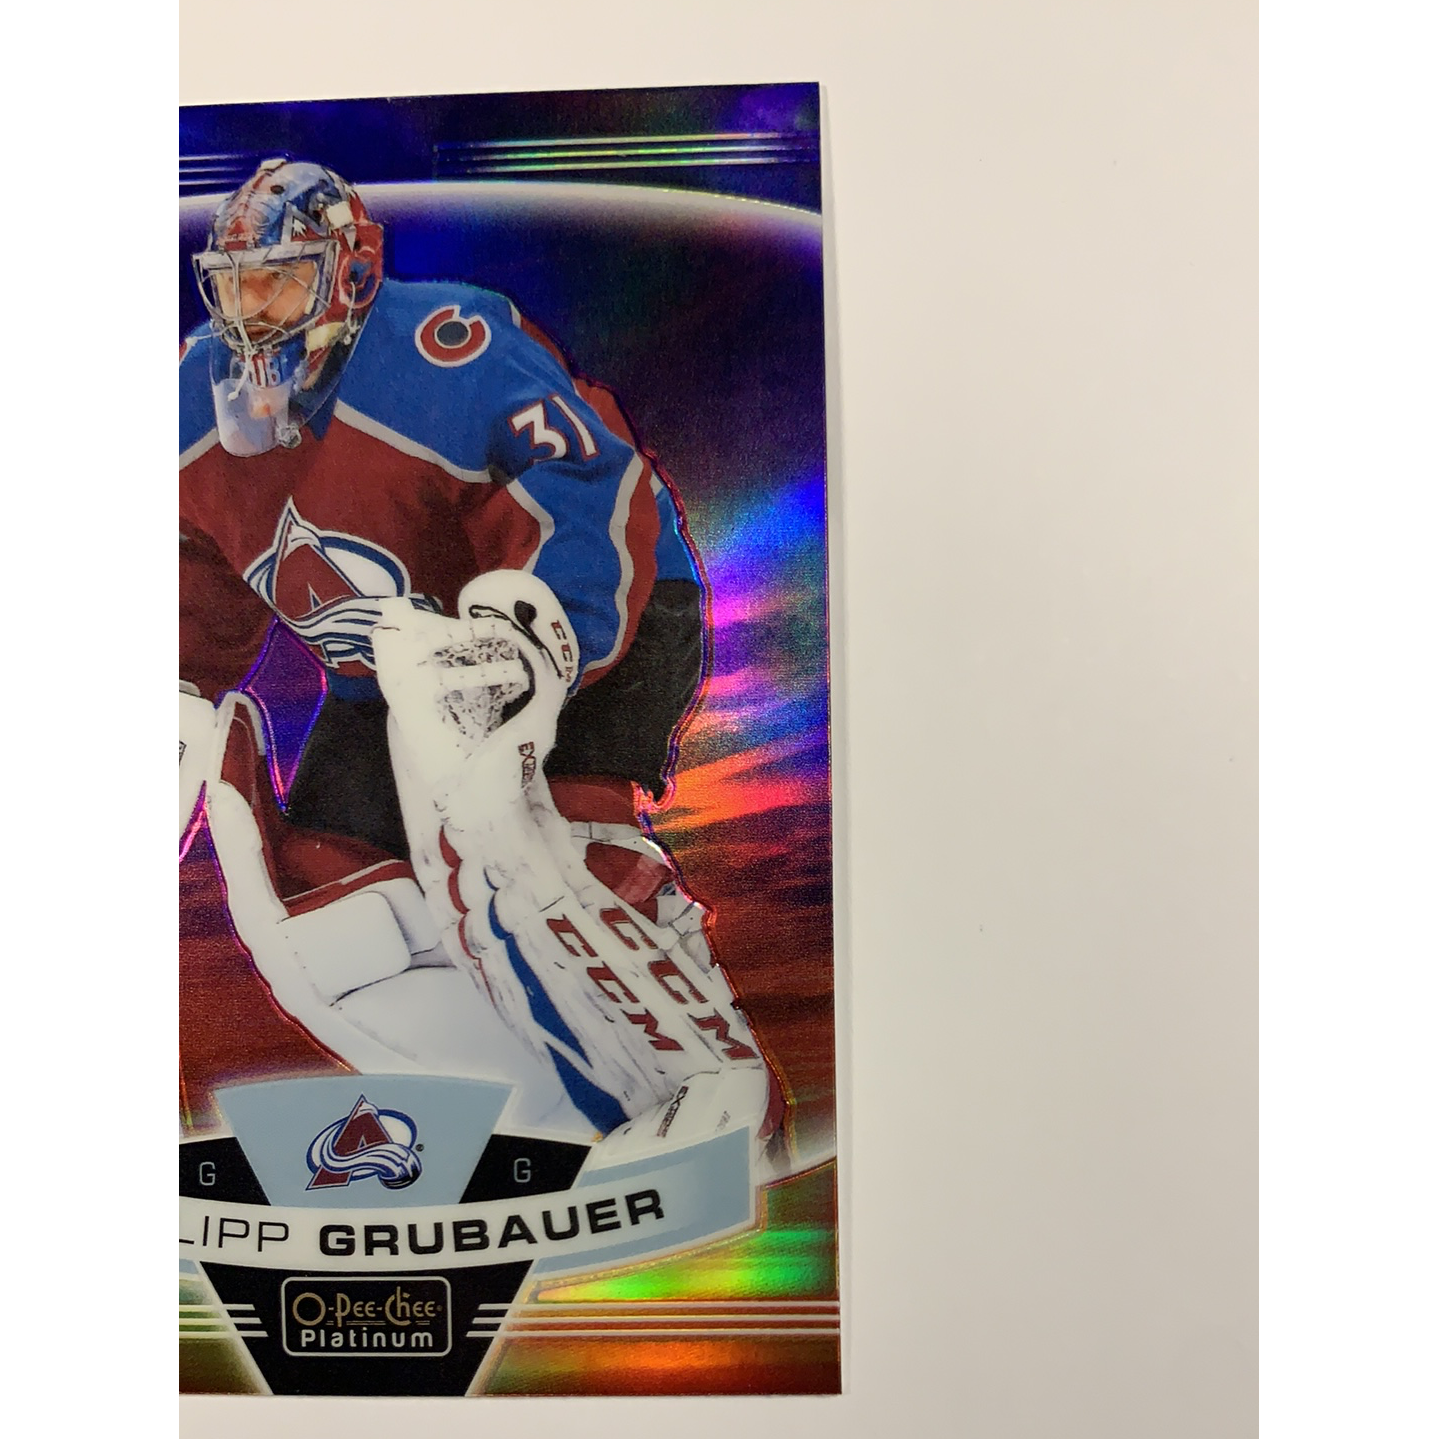  2019-20 O-Pee-Chee Platinum Philip Grubauer Sunset Paralell  Local Legends Cards & Collectibles